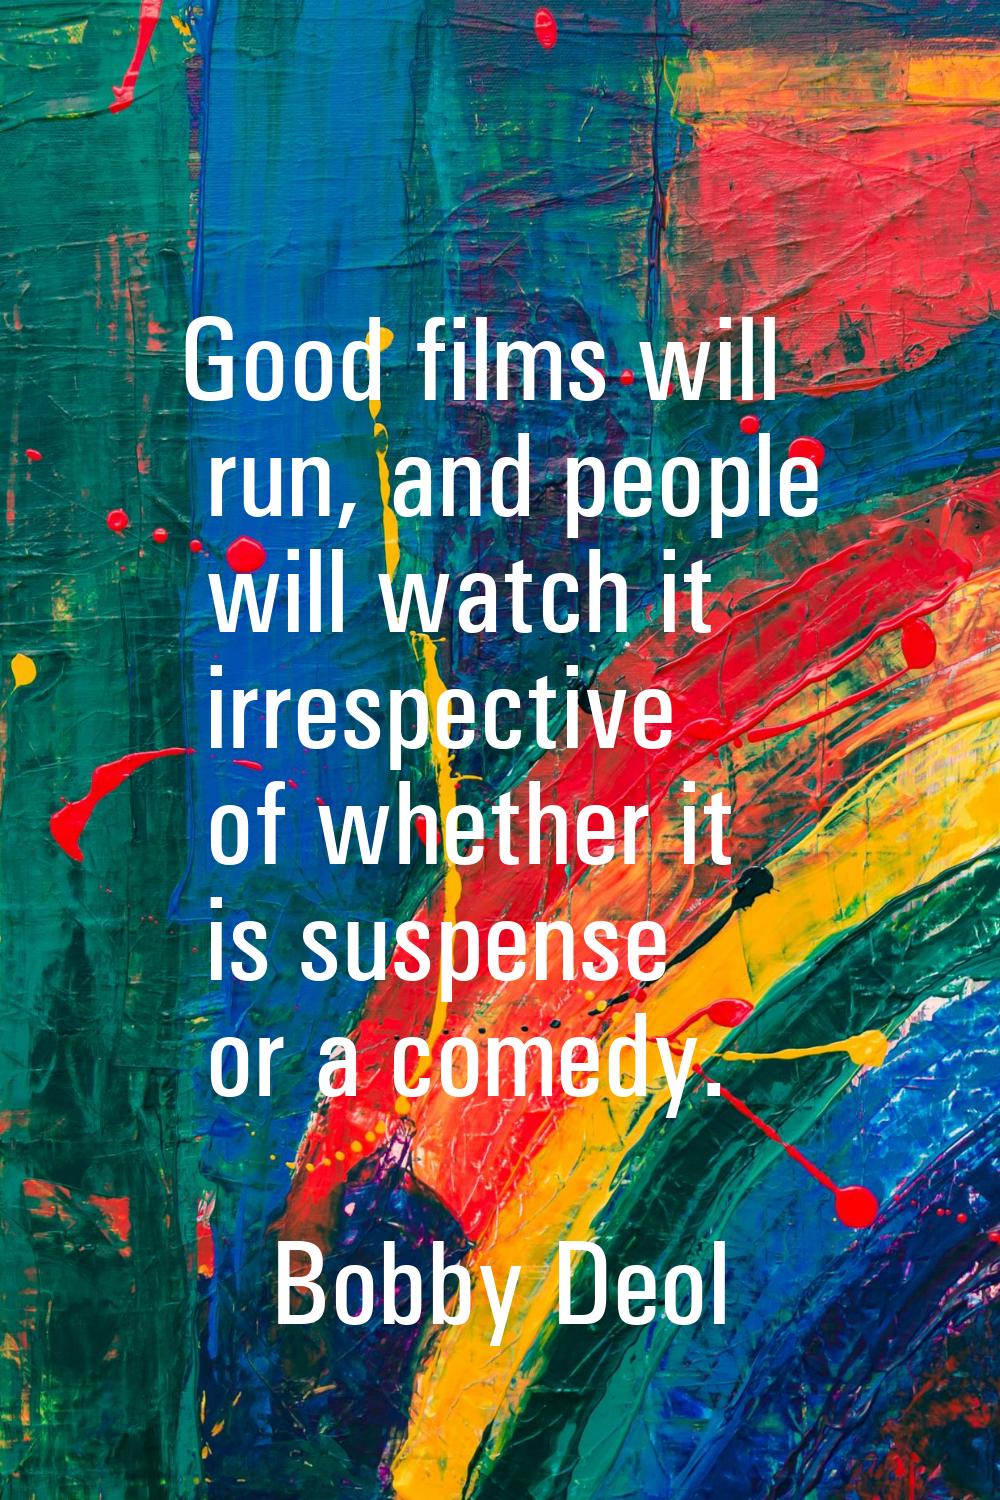 Good films will run, and people will watch it irrespective of whether it is suspense or a comedy.